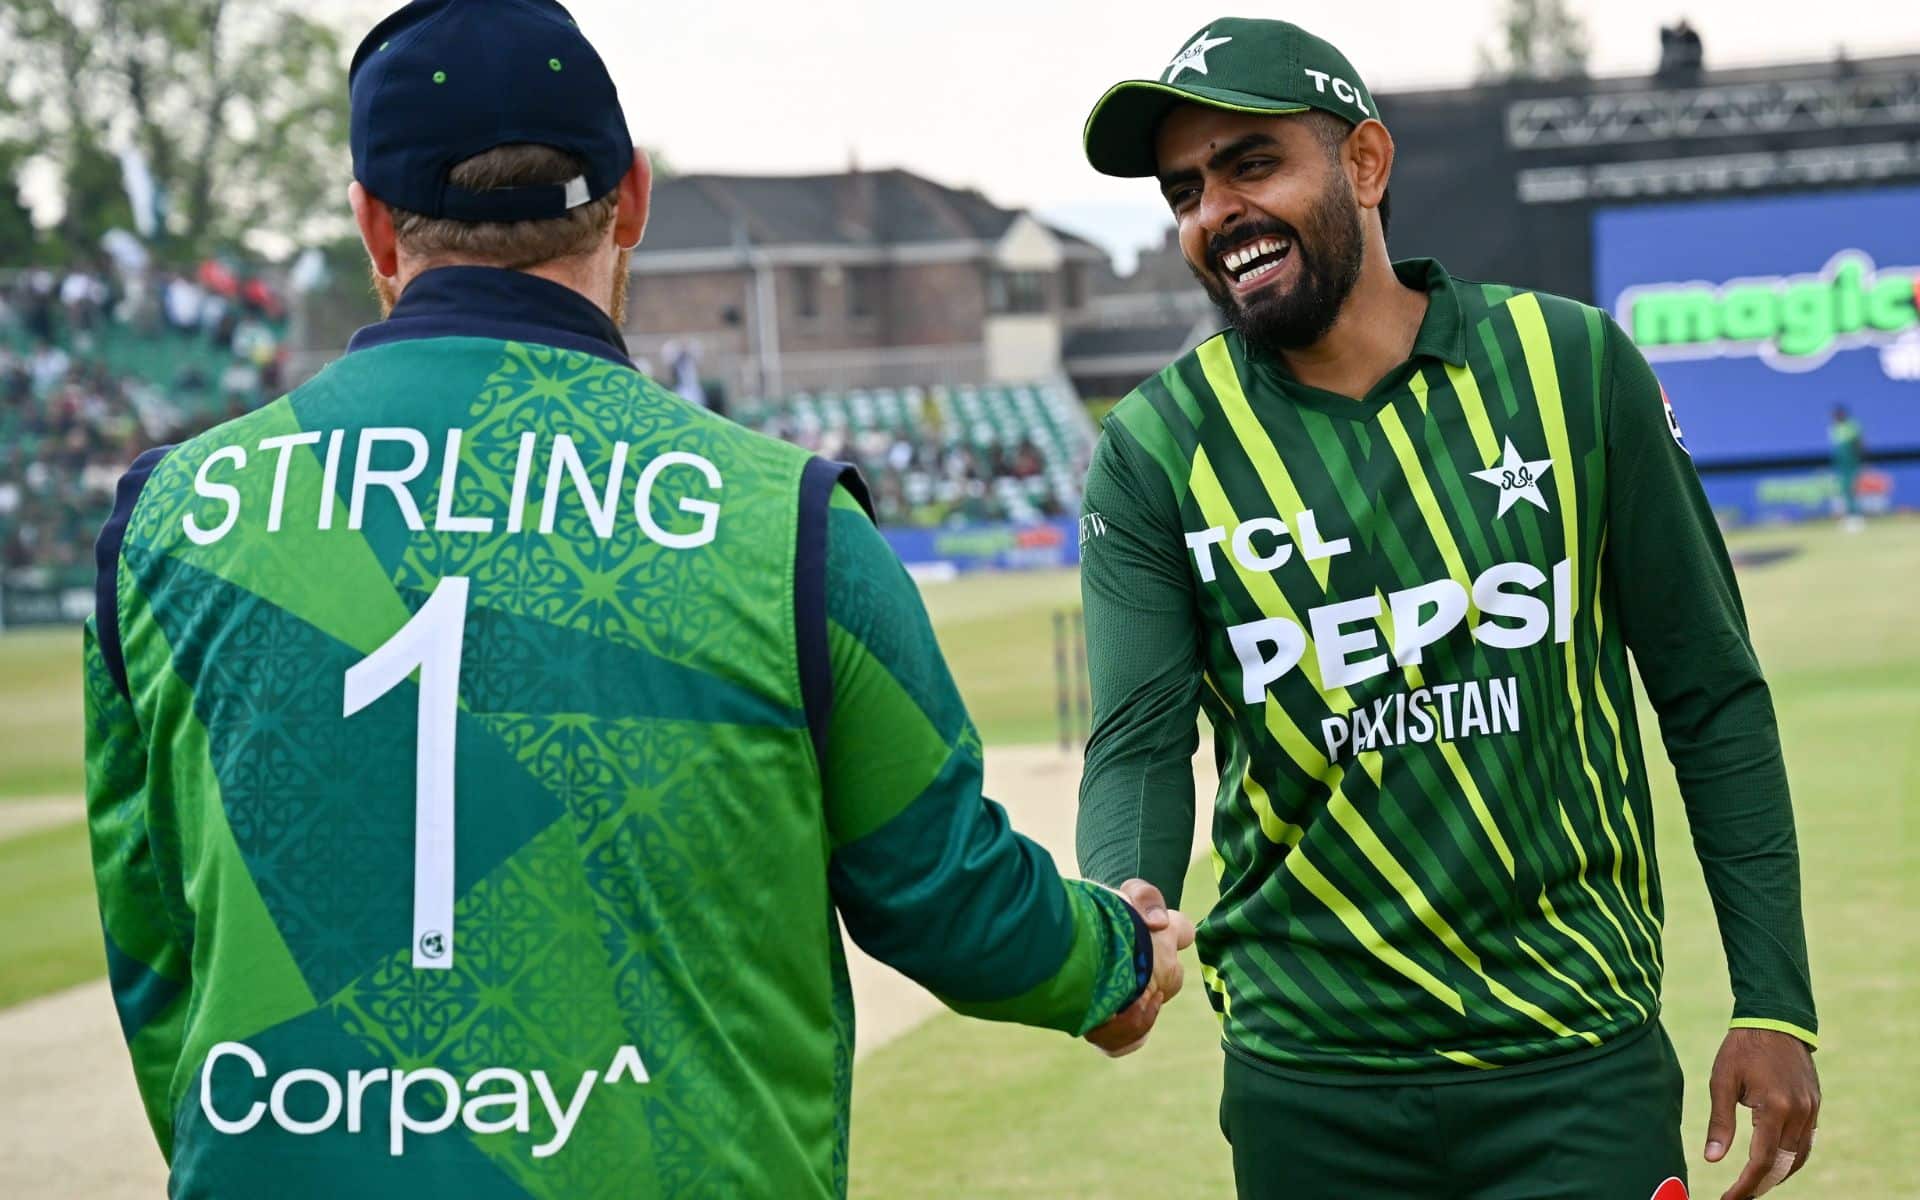 Ireland To Visit Pakistan To A Test Series In 2025, Confirms CI Chairman